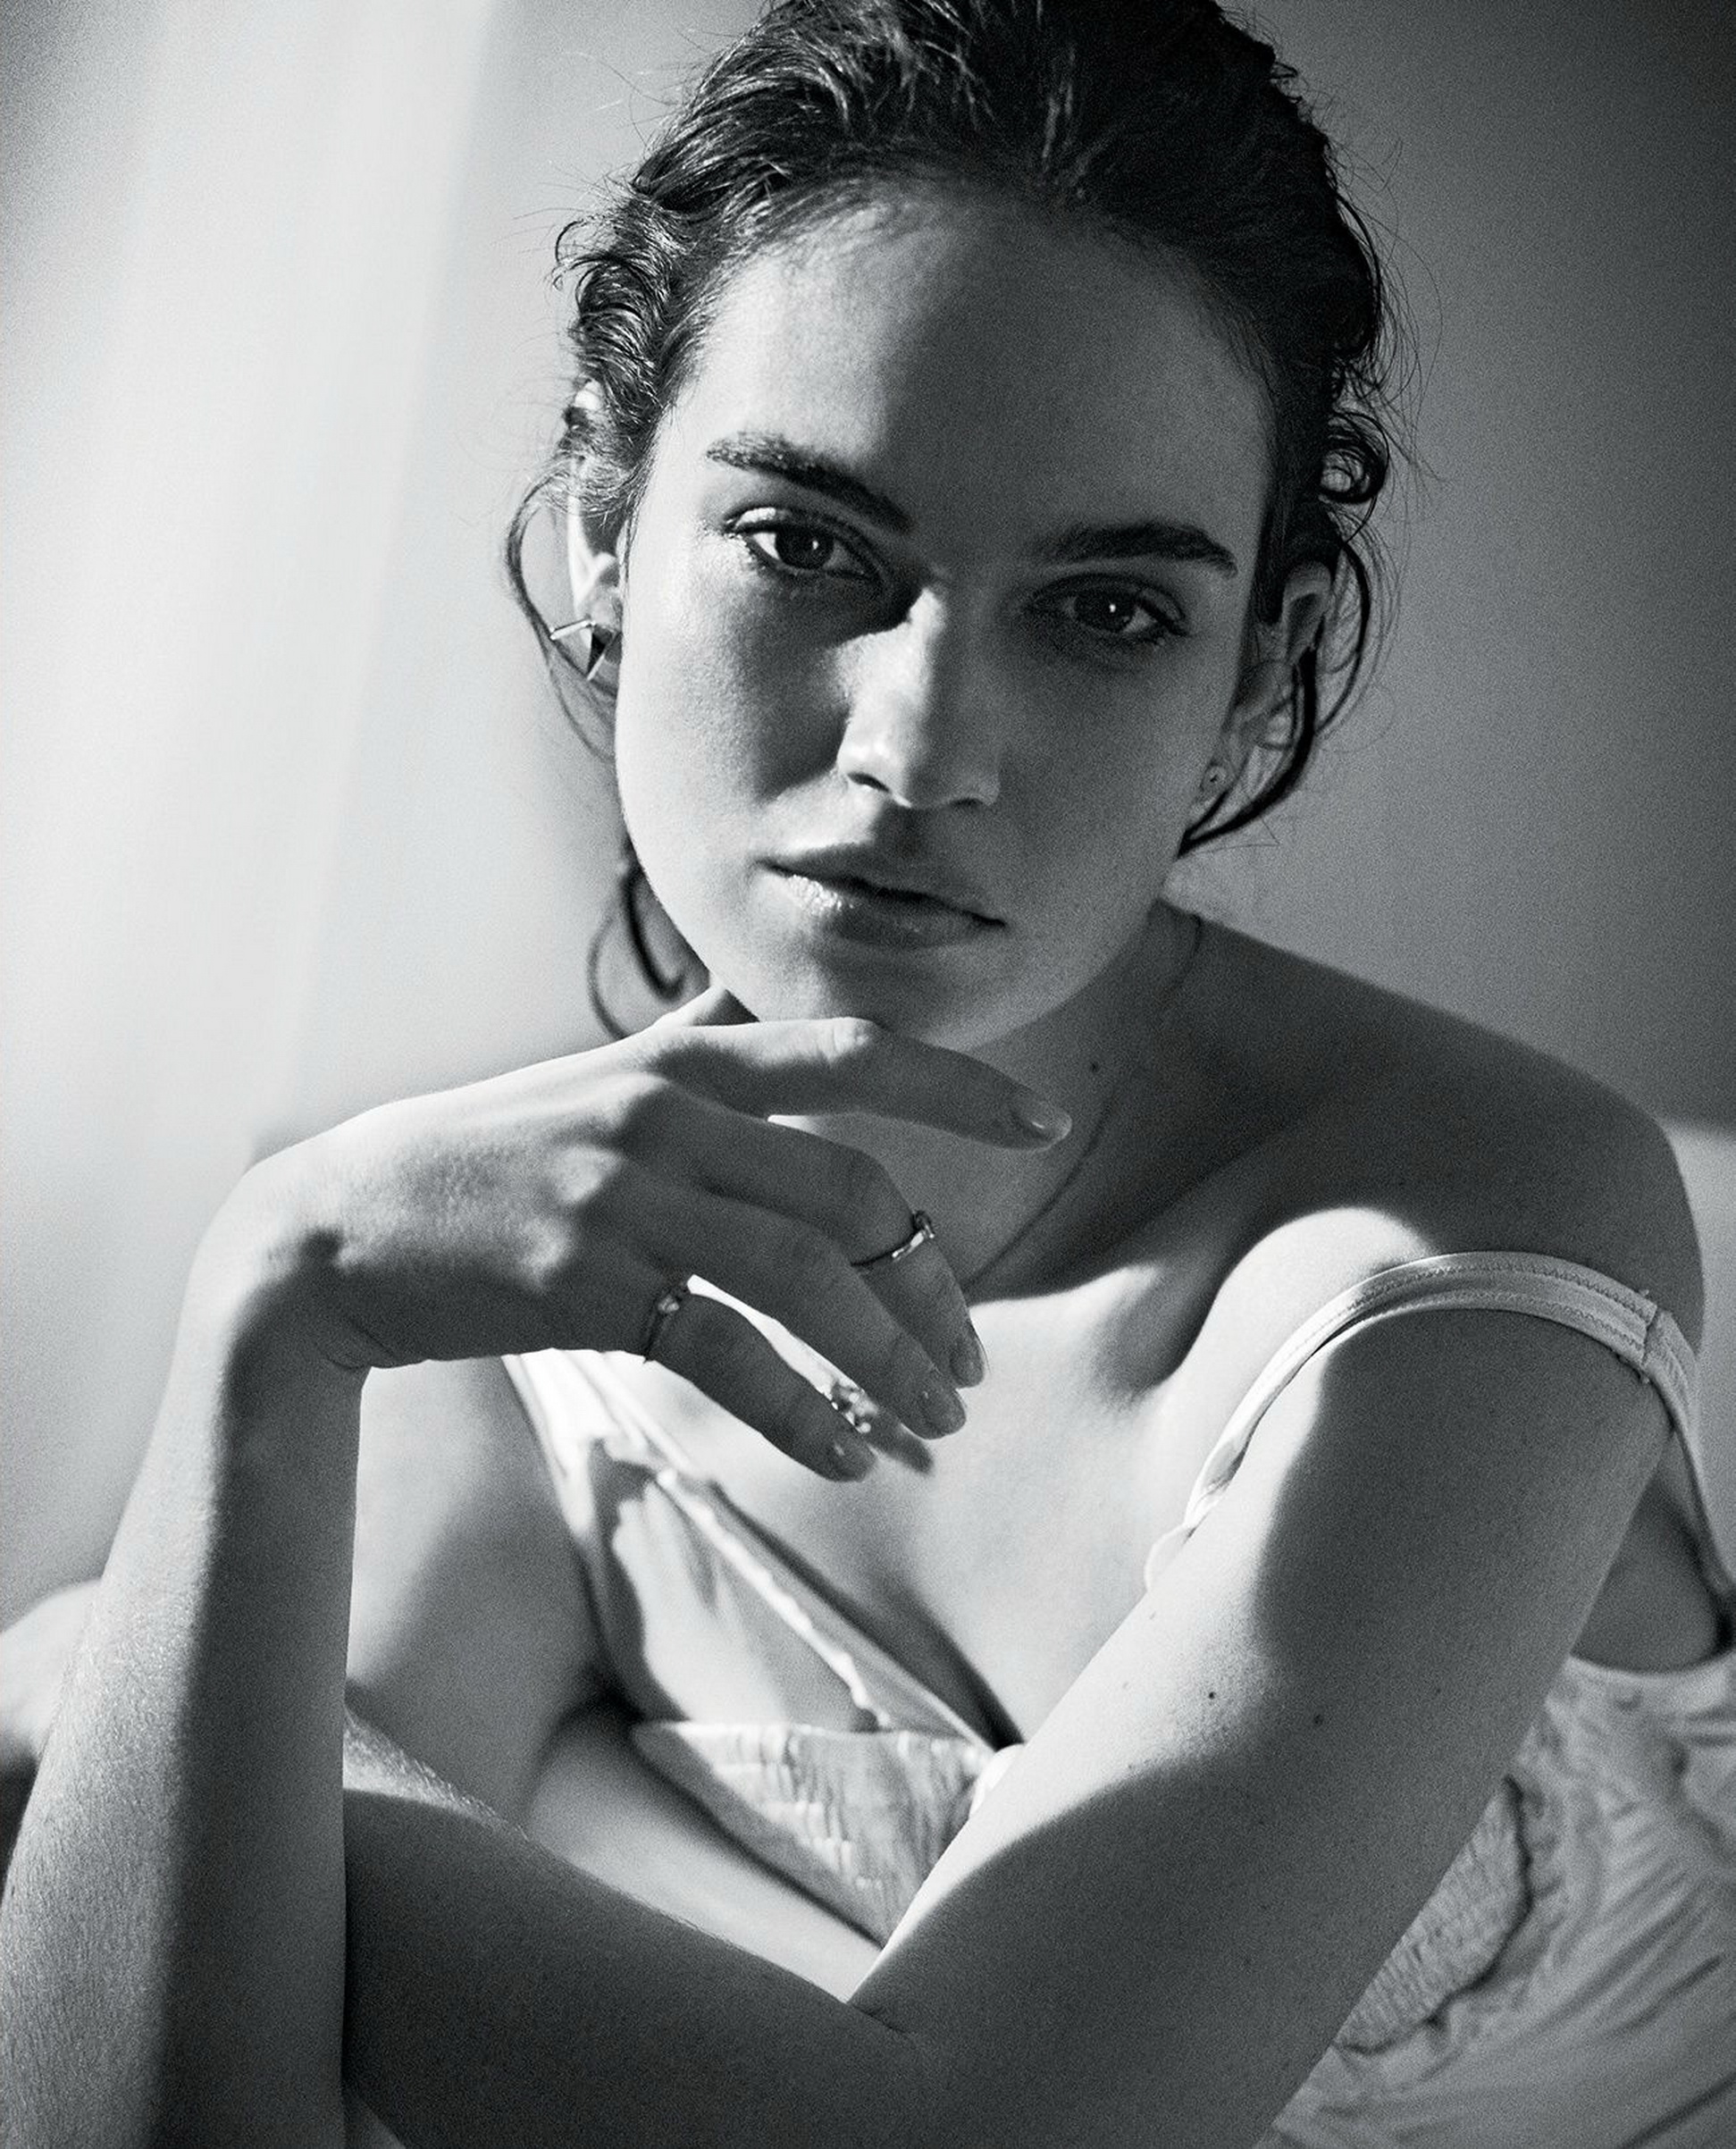 Lily James sexy Town & Country 2016 photo shoot nightwear topless 6x HQ photos 7.jpg